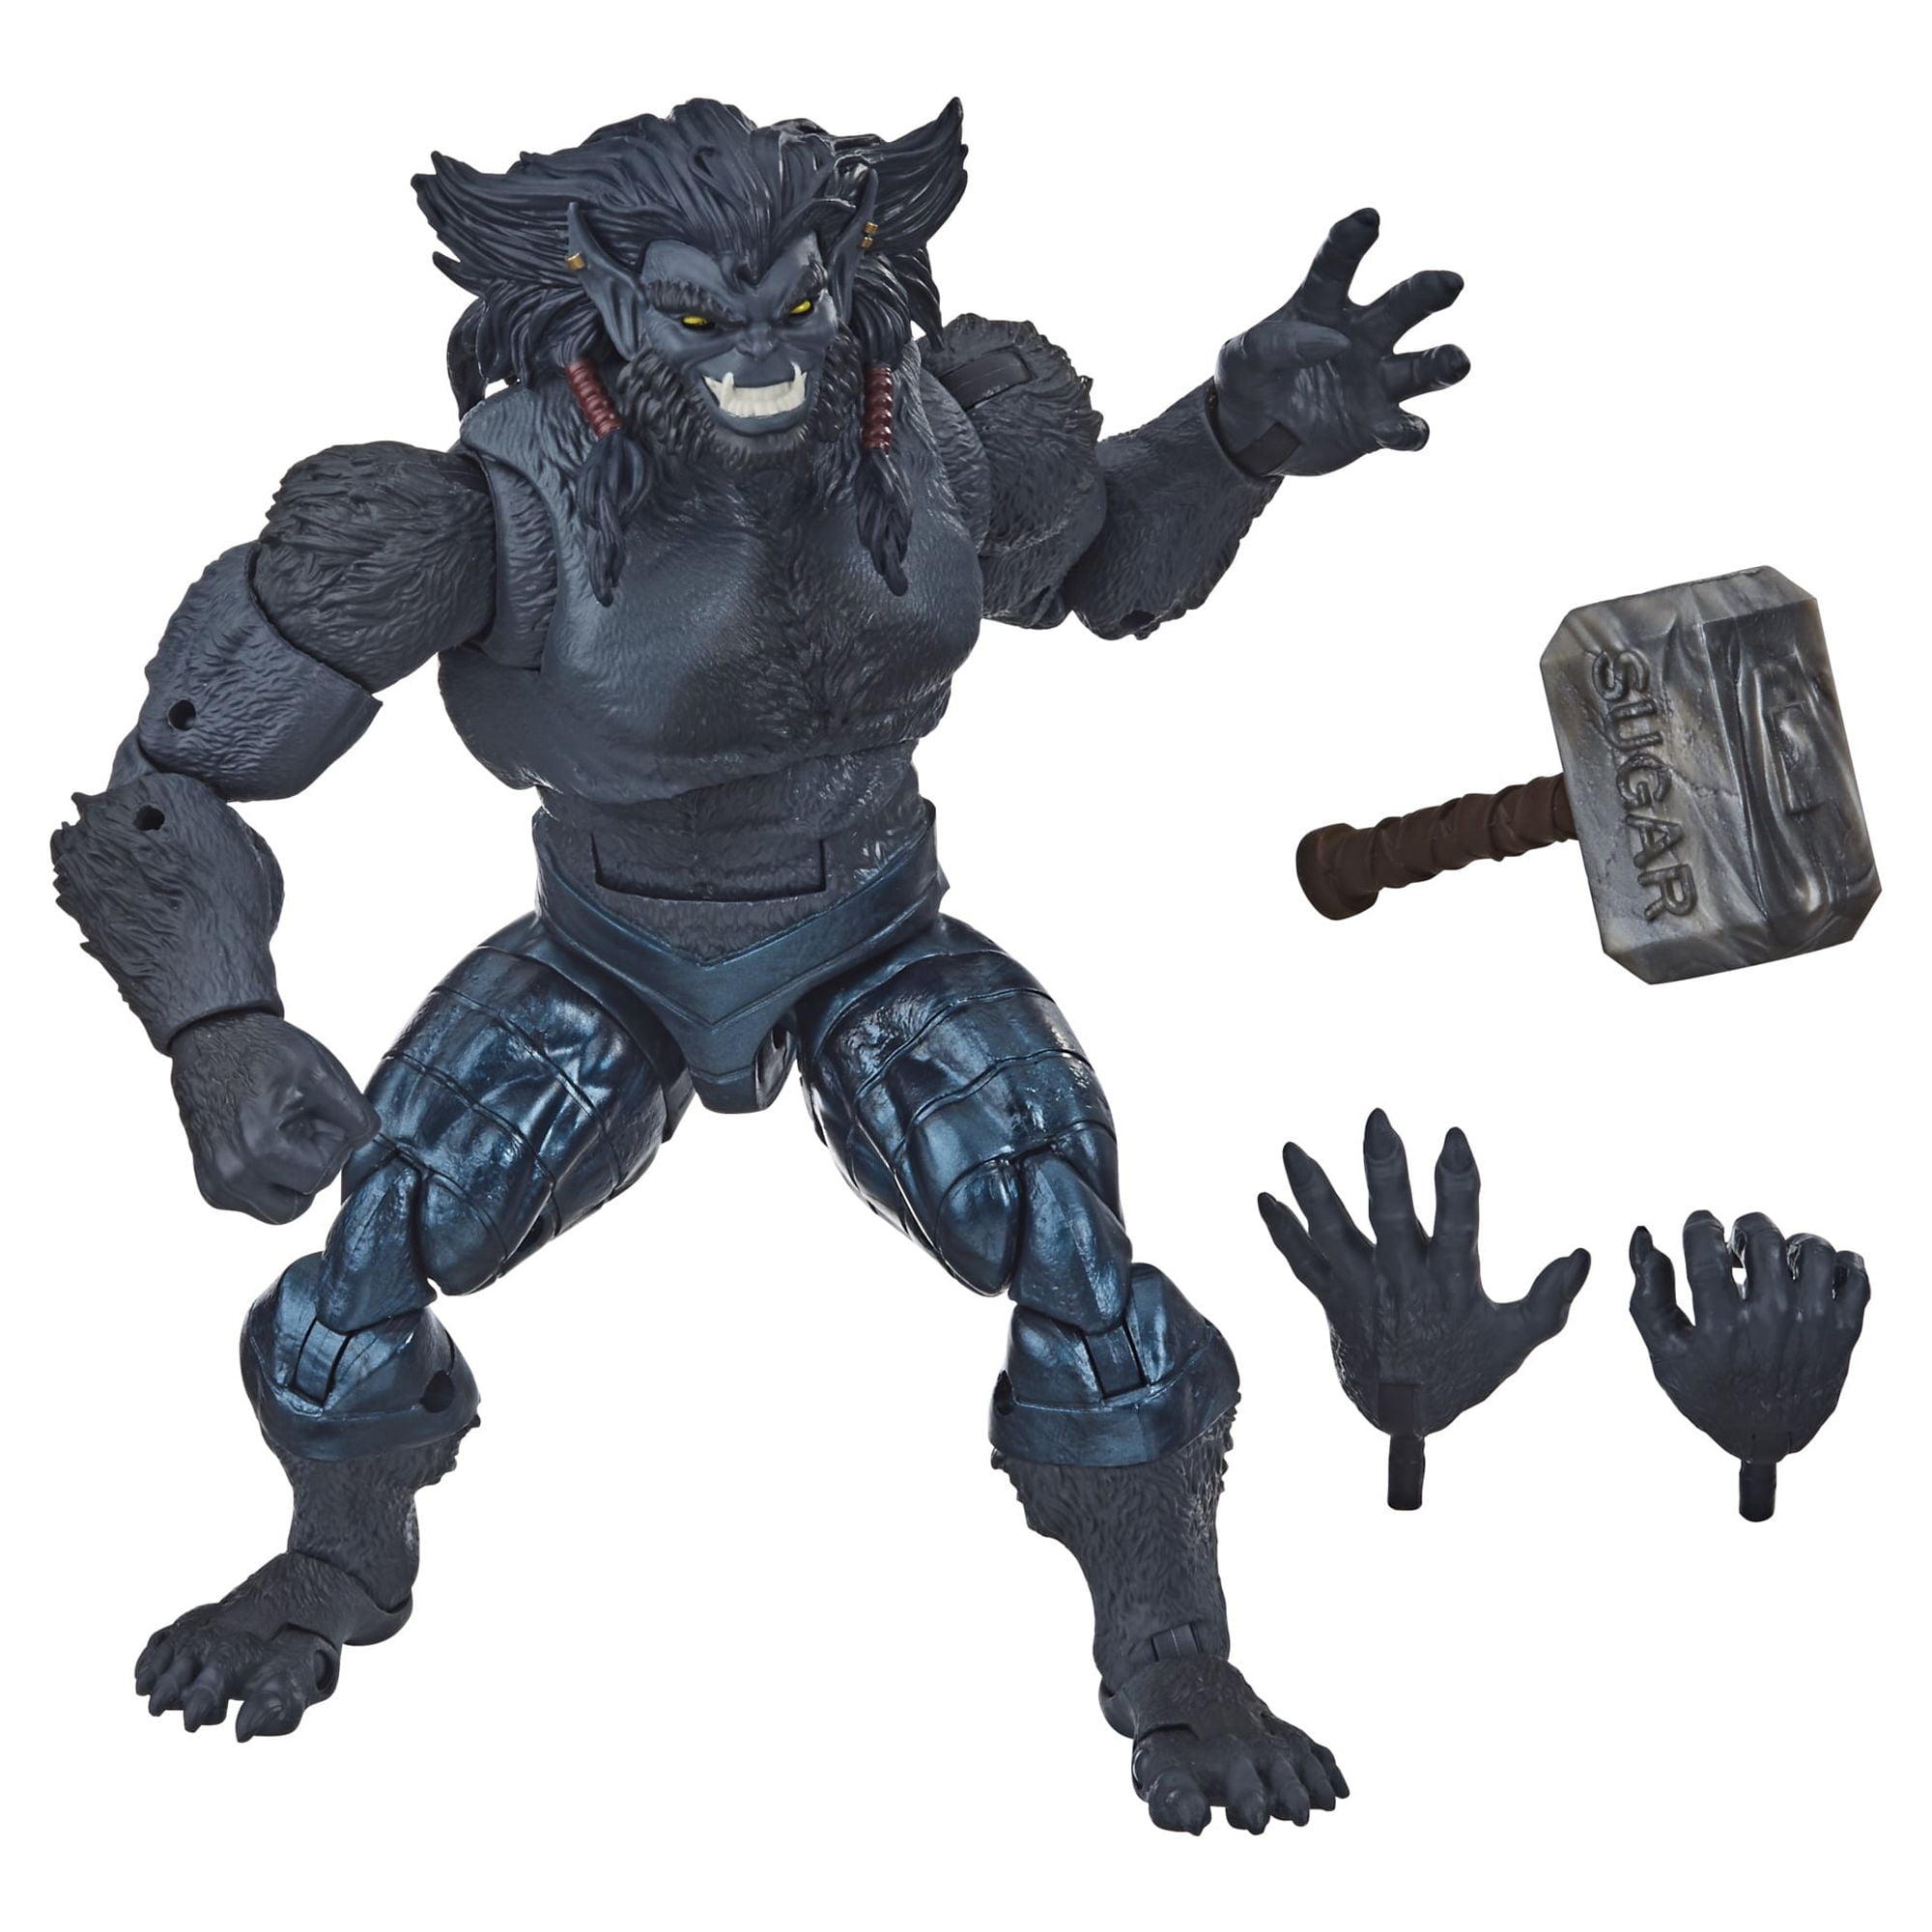  Diamond Select Toys Marvel Select Beast Action Figure : Toys &  Games